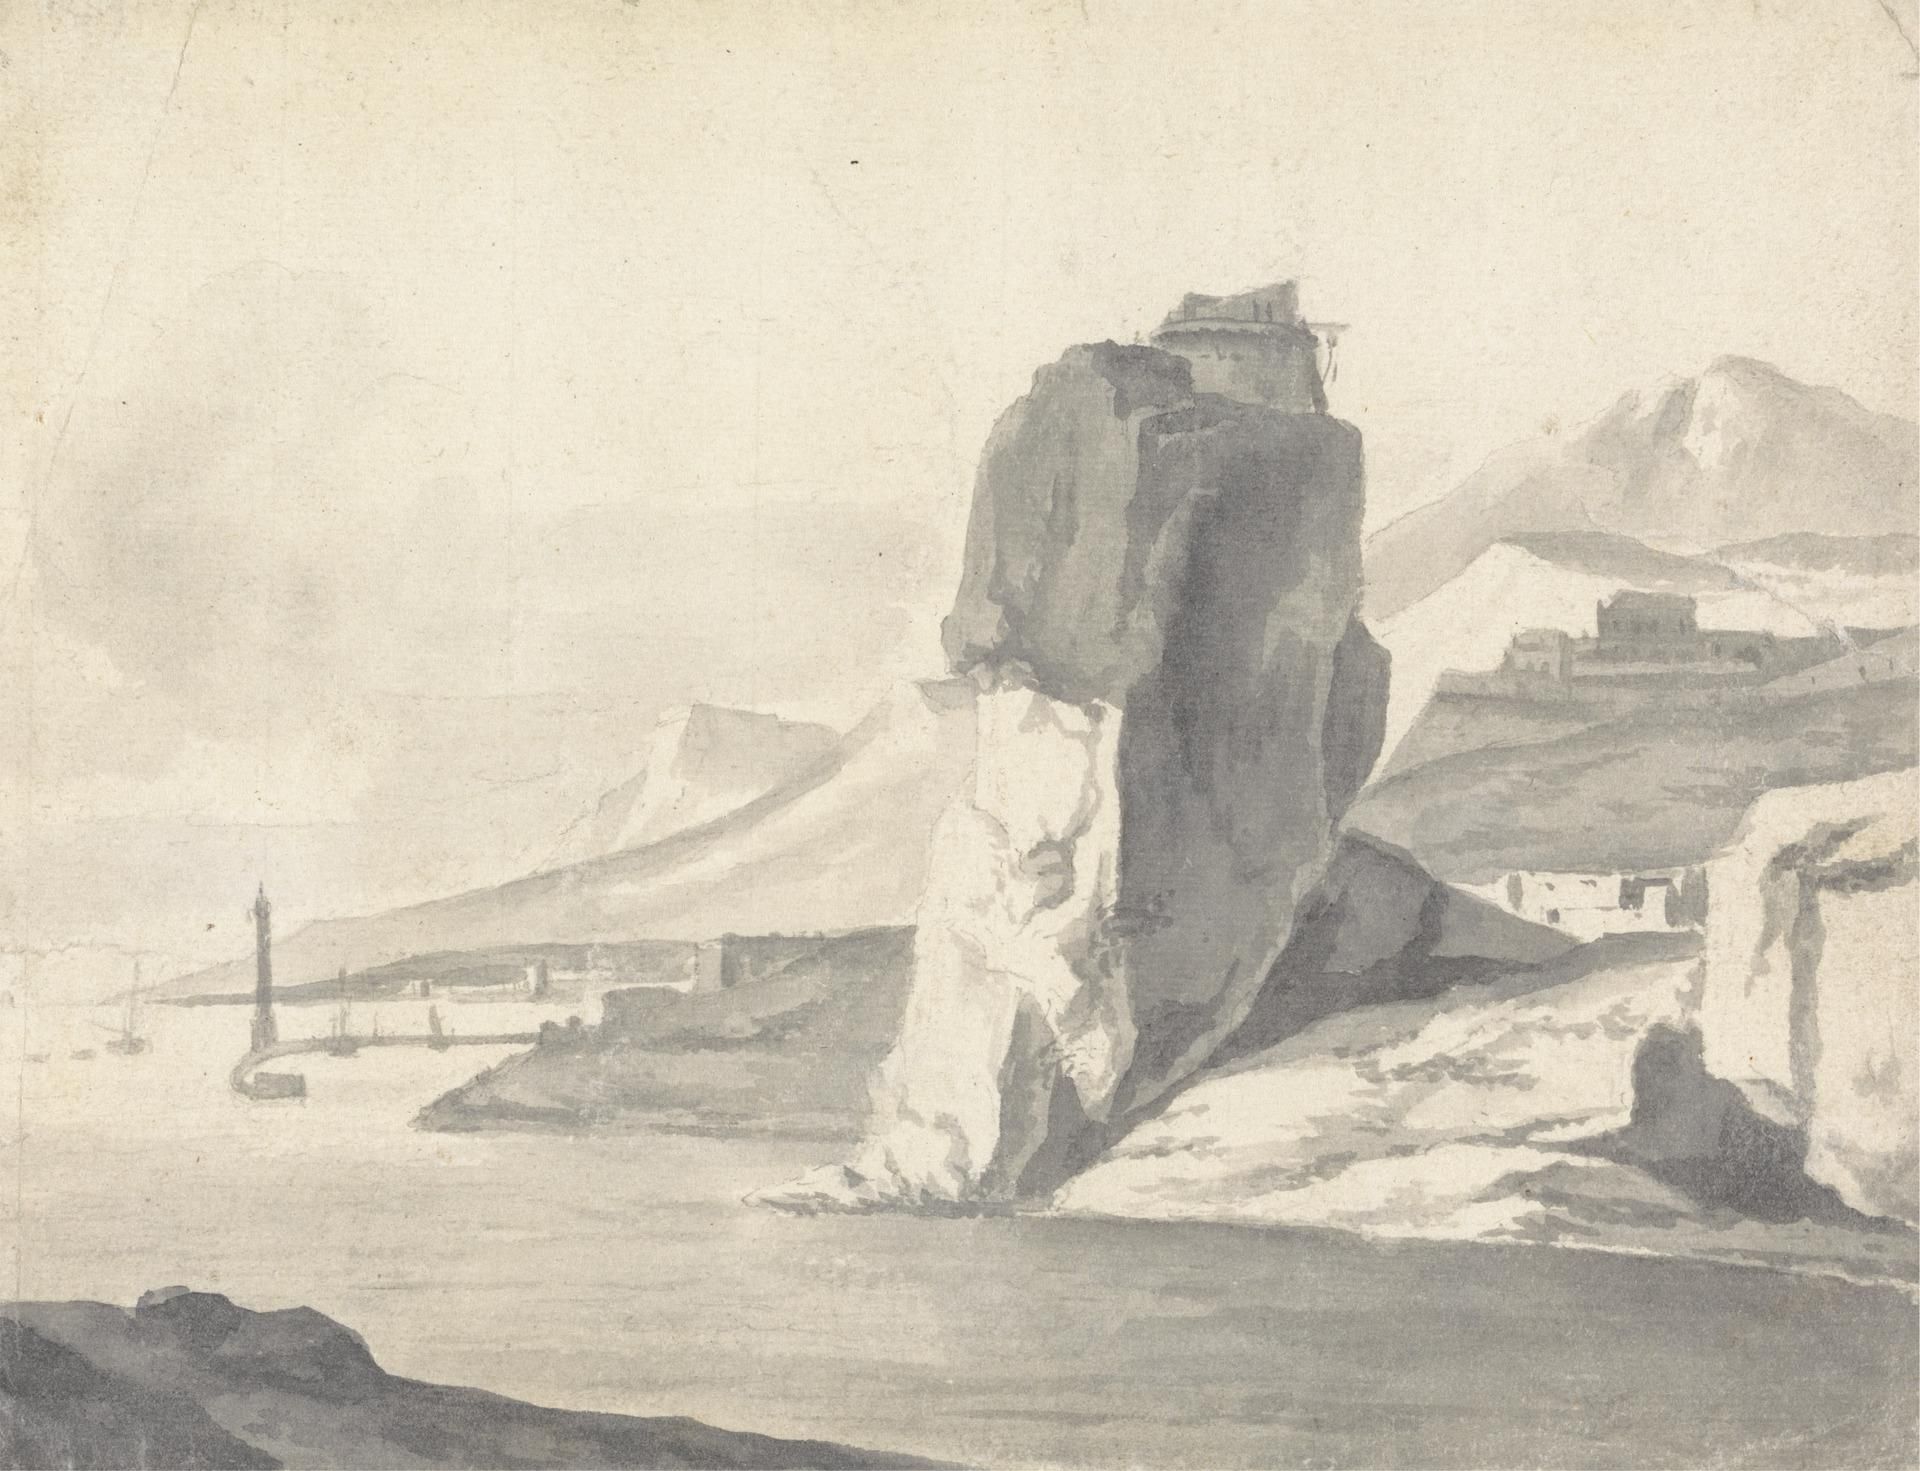 A Coastal Scene (Italian) with Breakwater, High Cliffs and a Fort